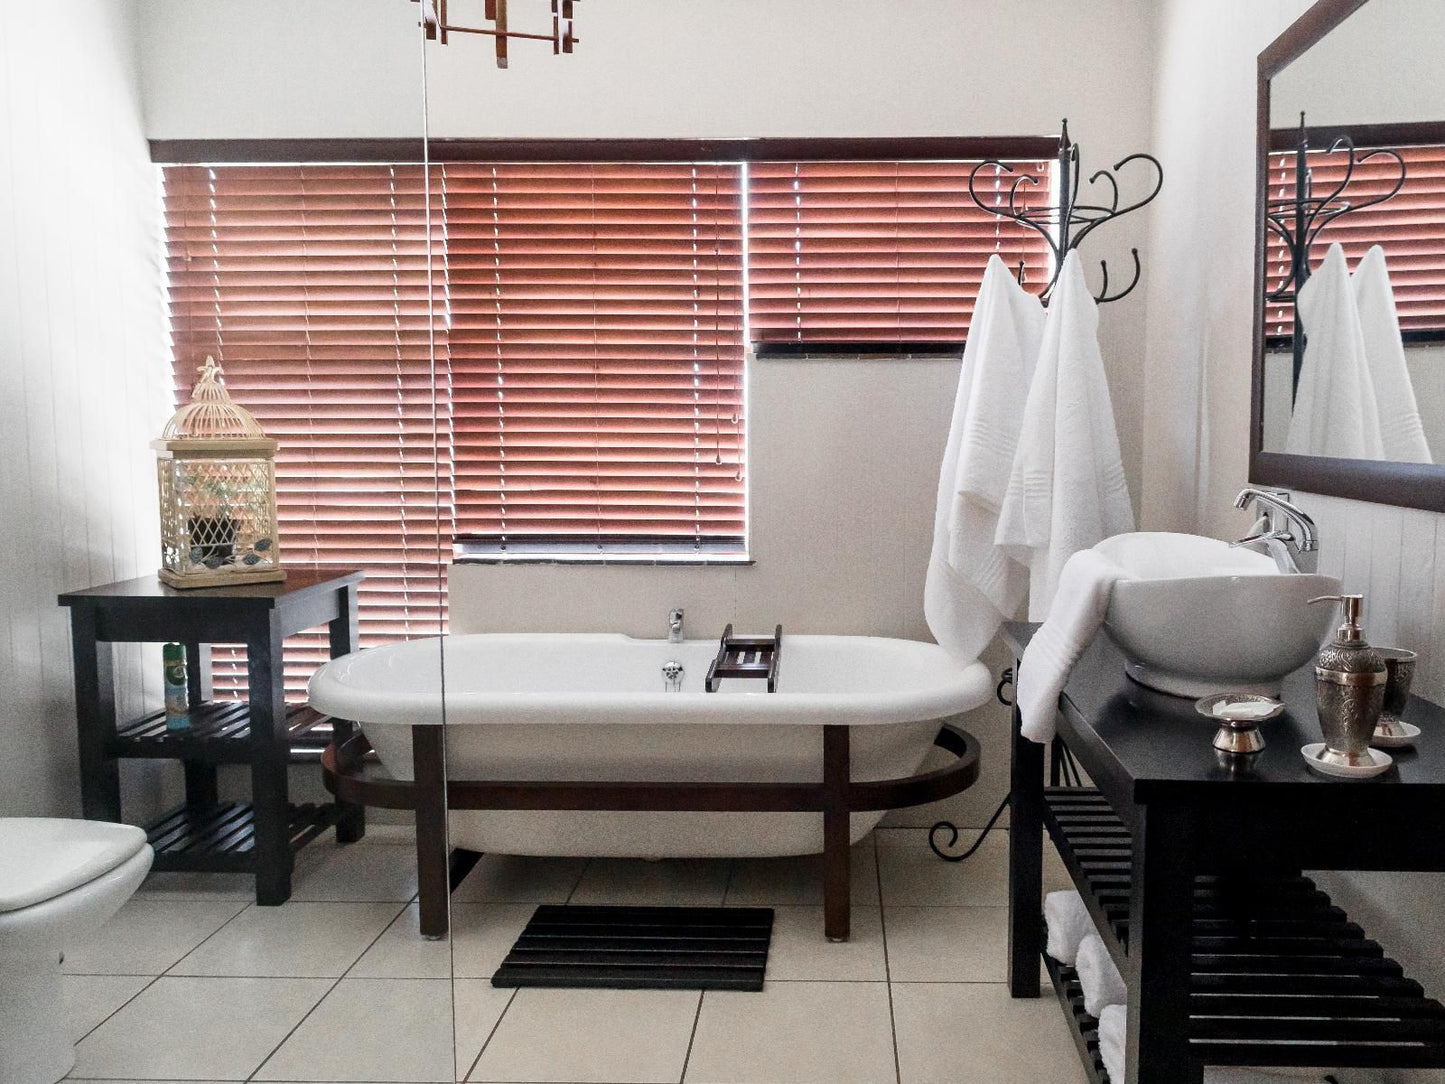 Wagtails Guest House Summerstrand Port Elizabeth Eastern Cape South Africa Bathroom